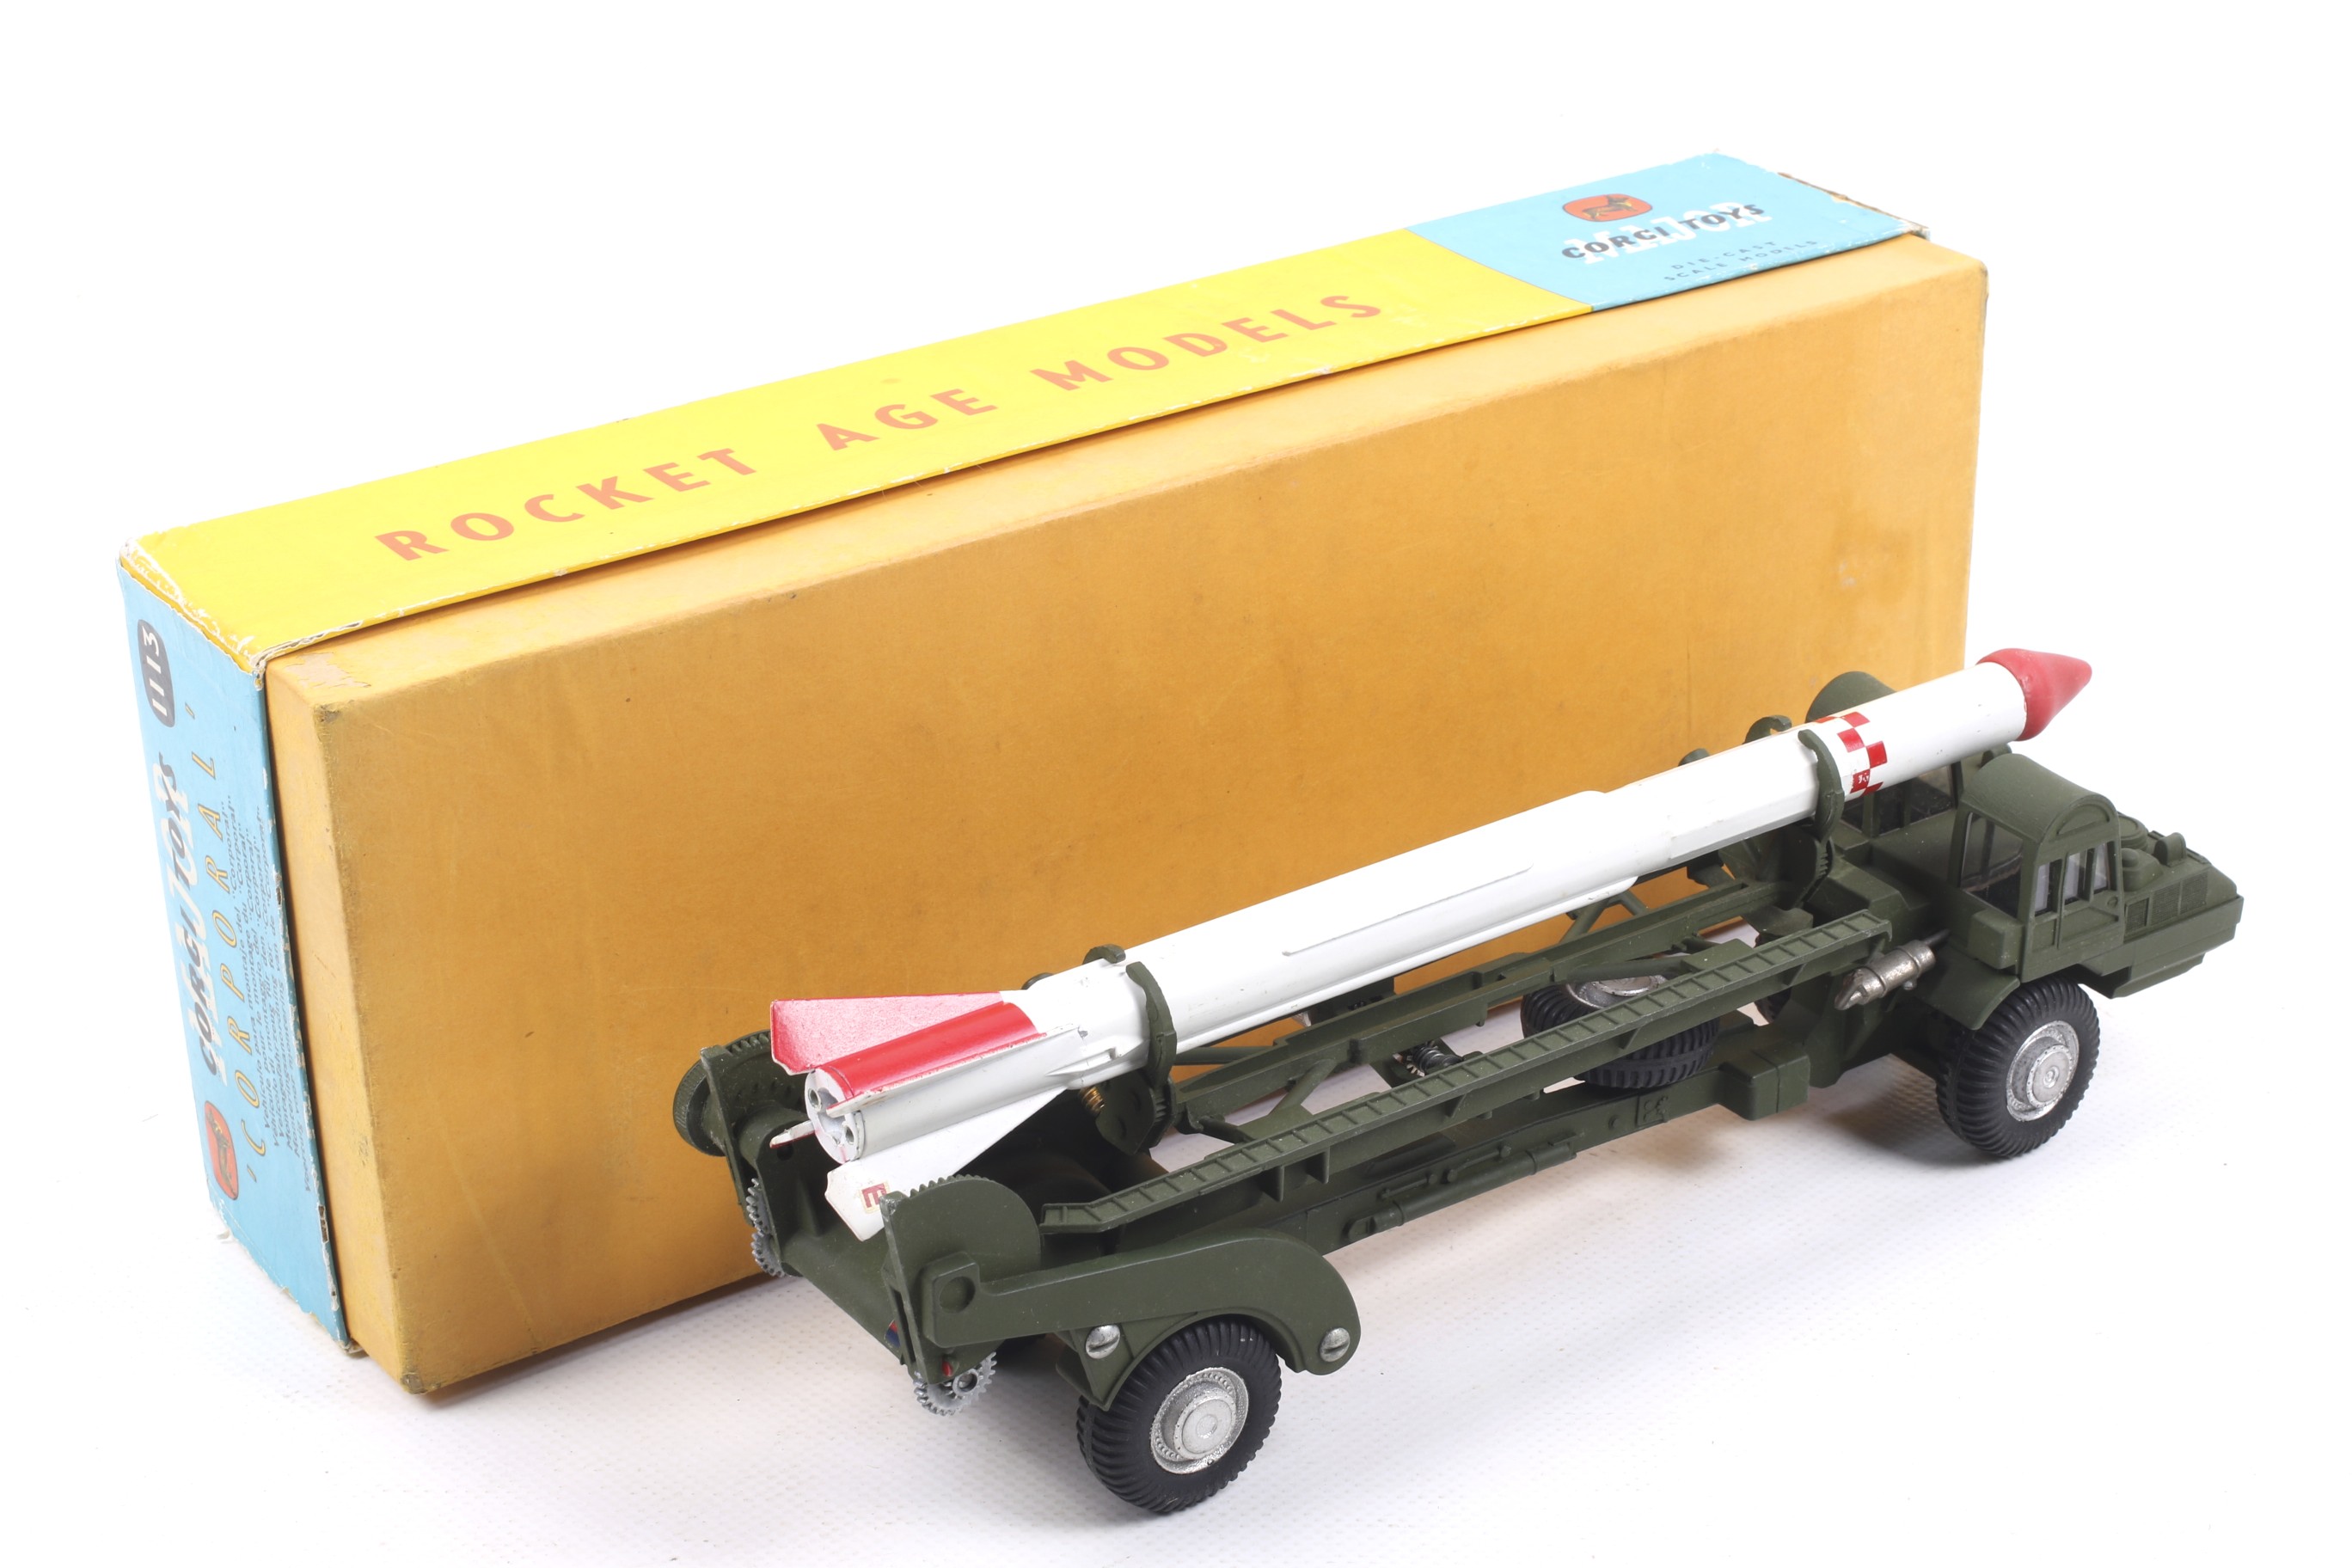 A Corgi diecast 'Corporal' Guided Missile on Erector Vehicle. No. - Image 2 of 2